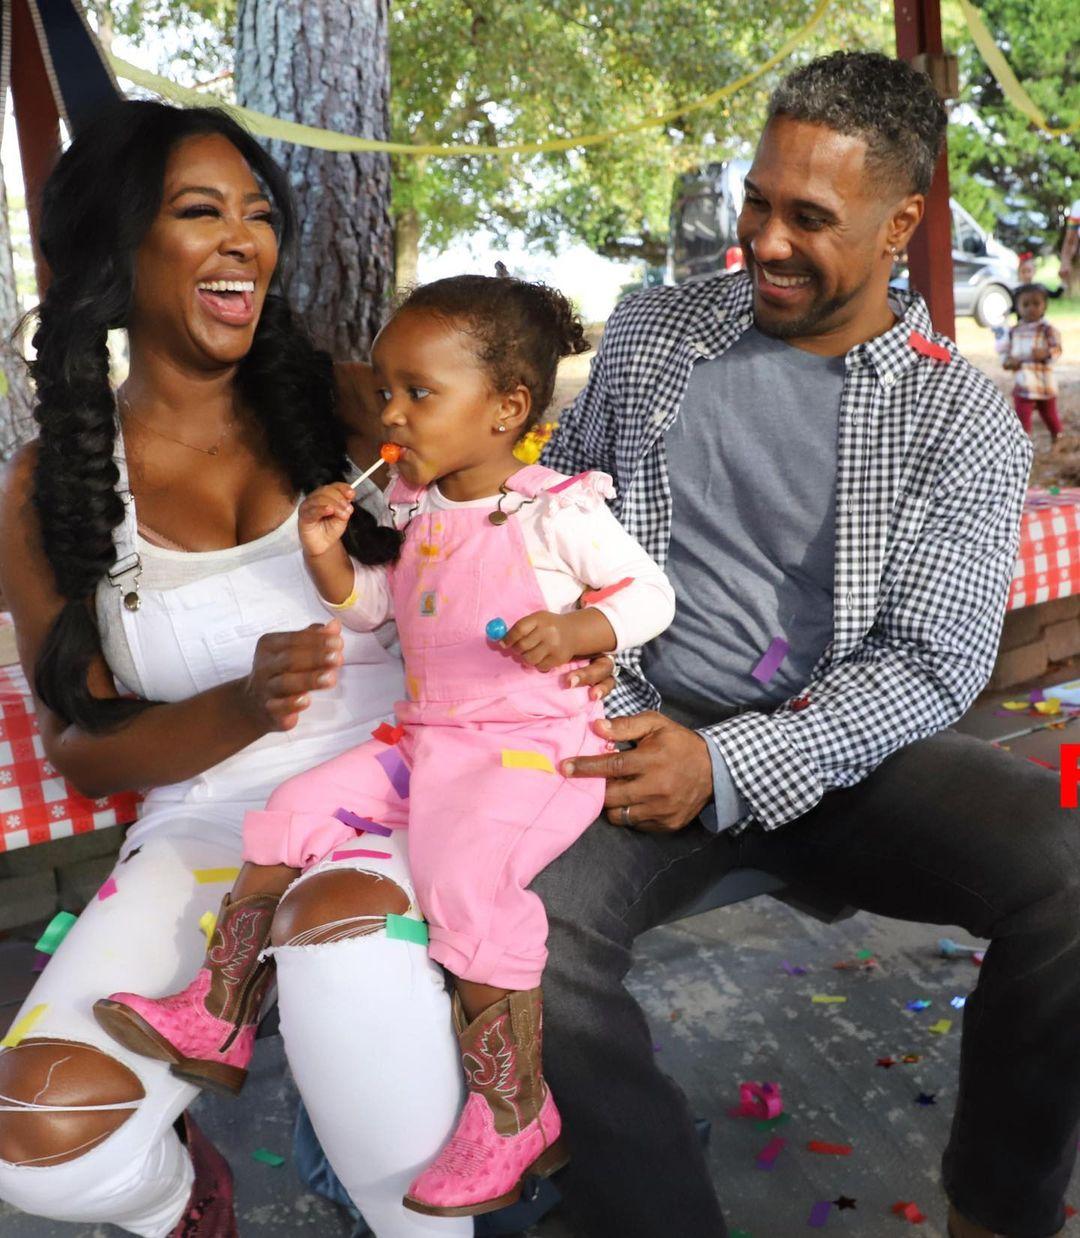 'RHOA' Putting Kenya Moore's Child In Compromising Position, Reality Stars Back In Court